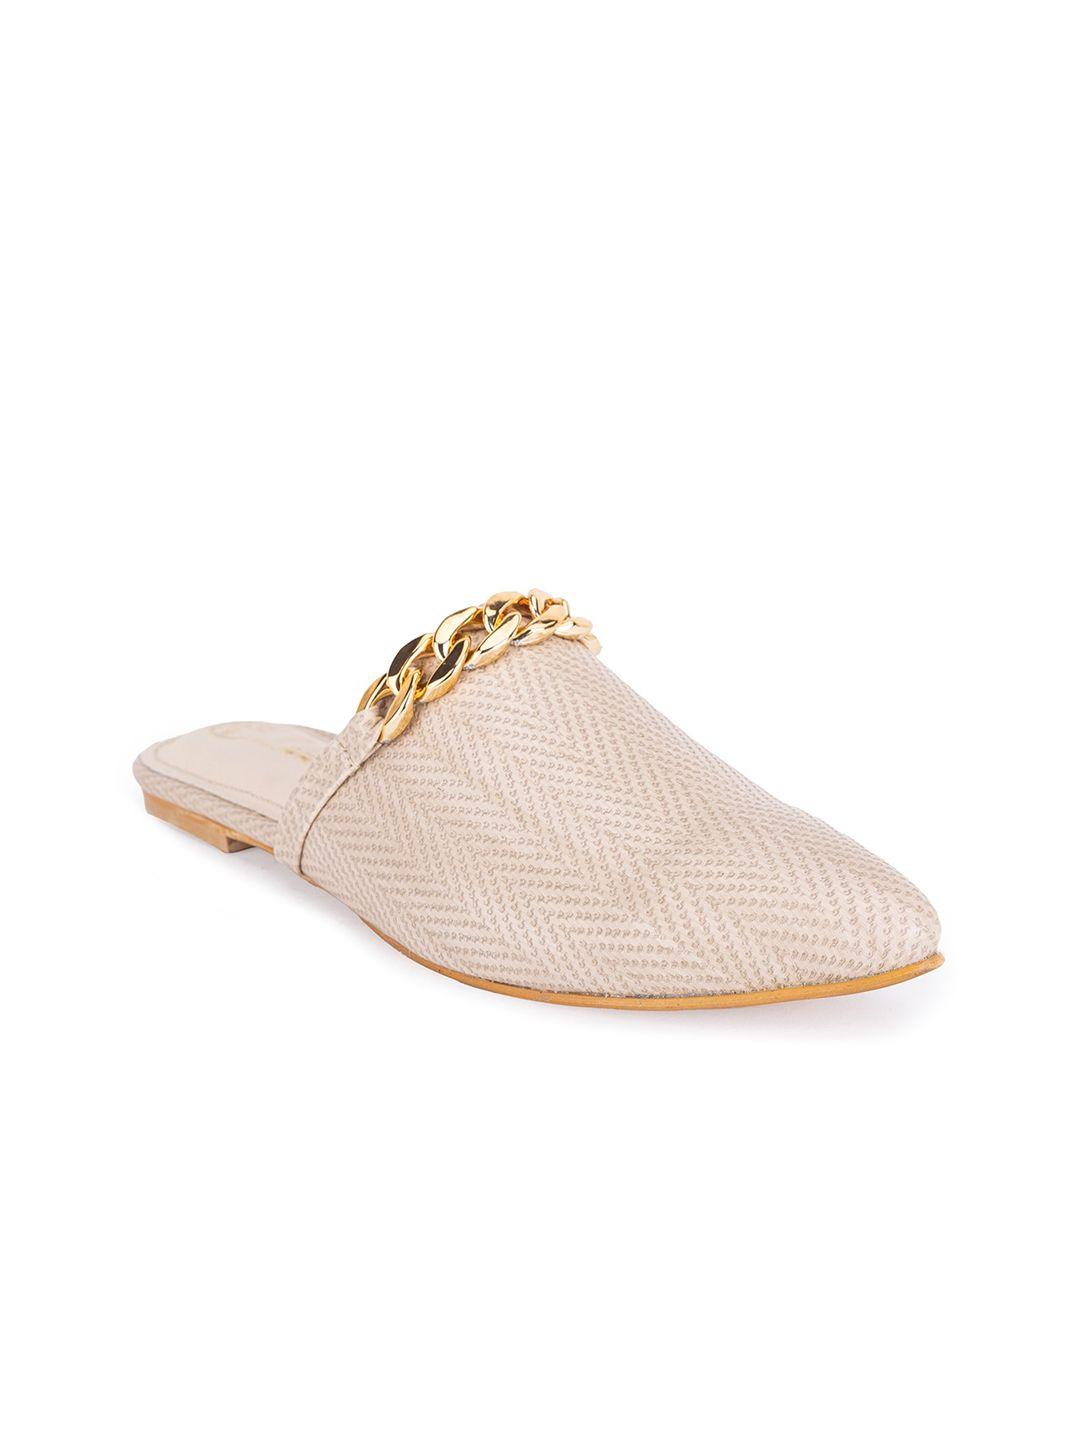 beaver pointed toe embellished textured mules